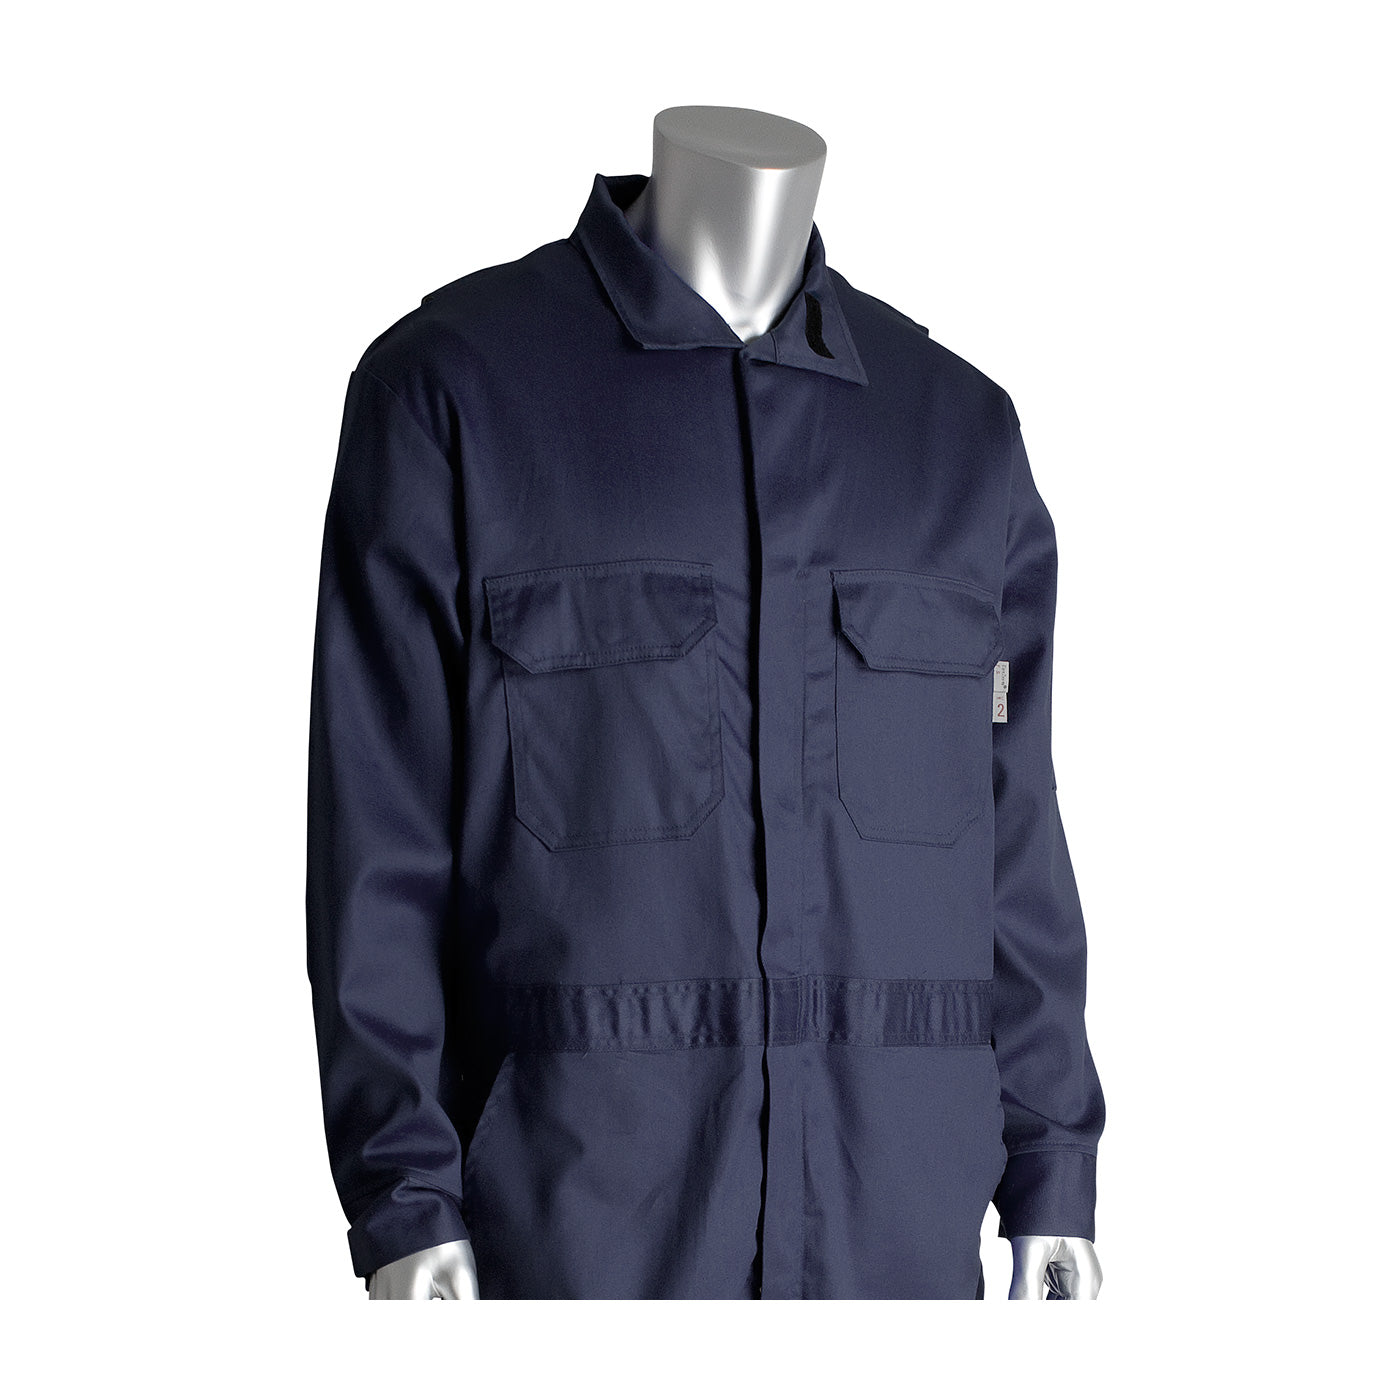 PIP 385-FRSC-KH/4X AR/FR Dual Certified Coverall with Zipper Closure - 9.2 Cal/cm2